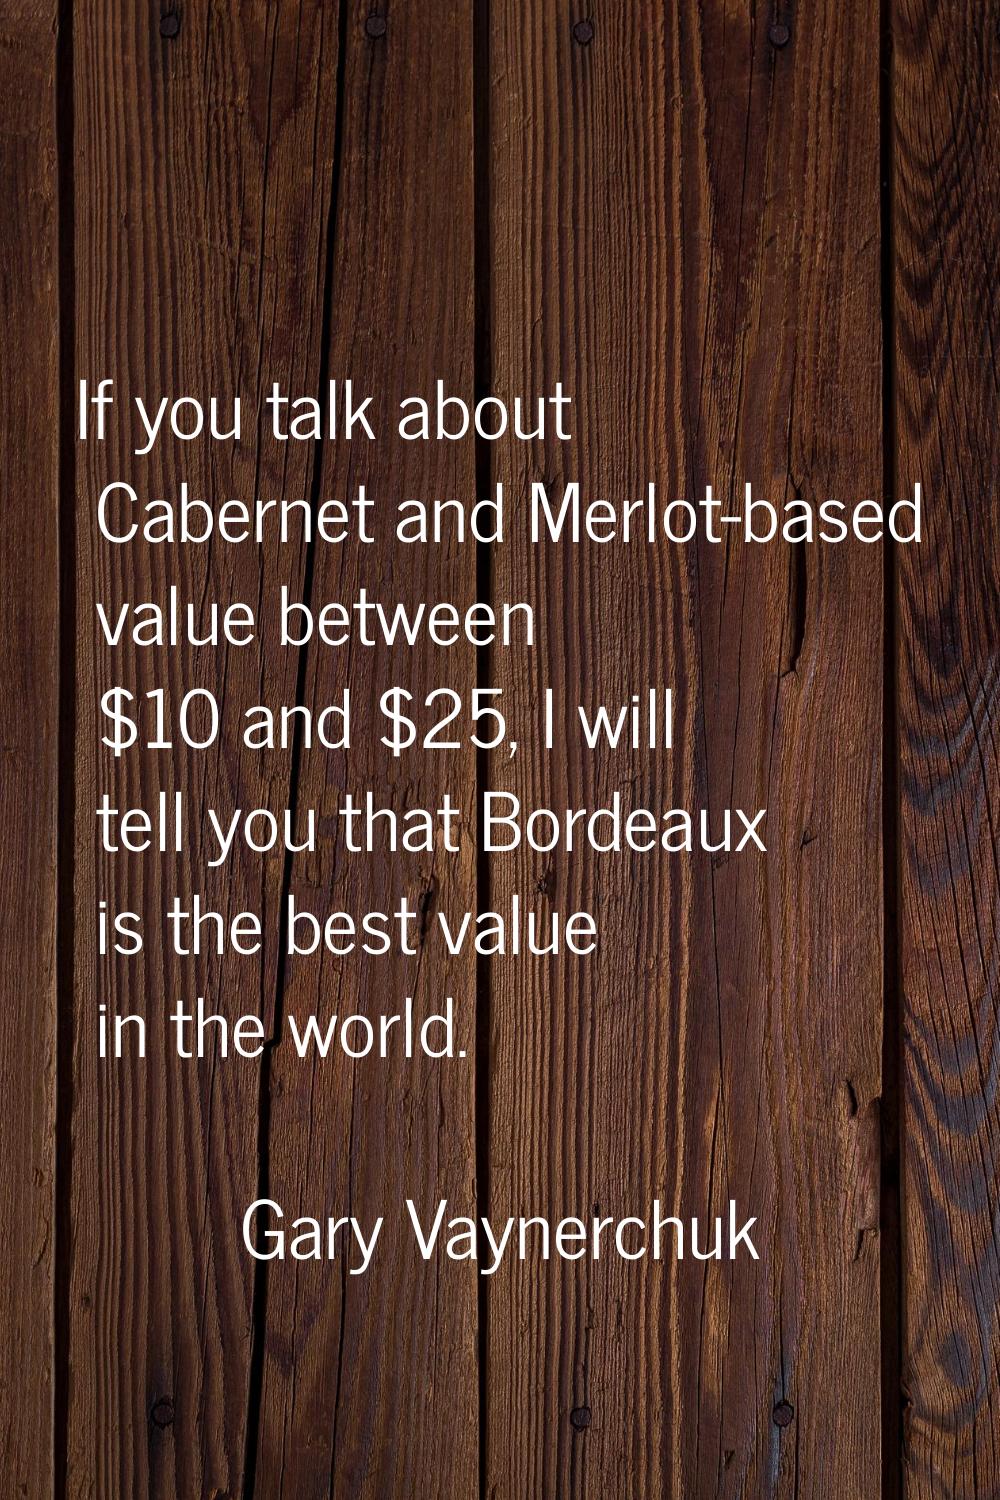 If you talk about Cabernet and Merlot-based value between $10 and $25, I will tell you that Bordeau